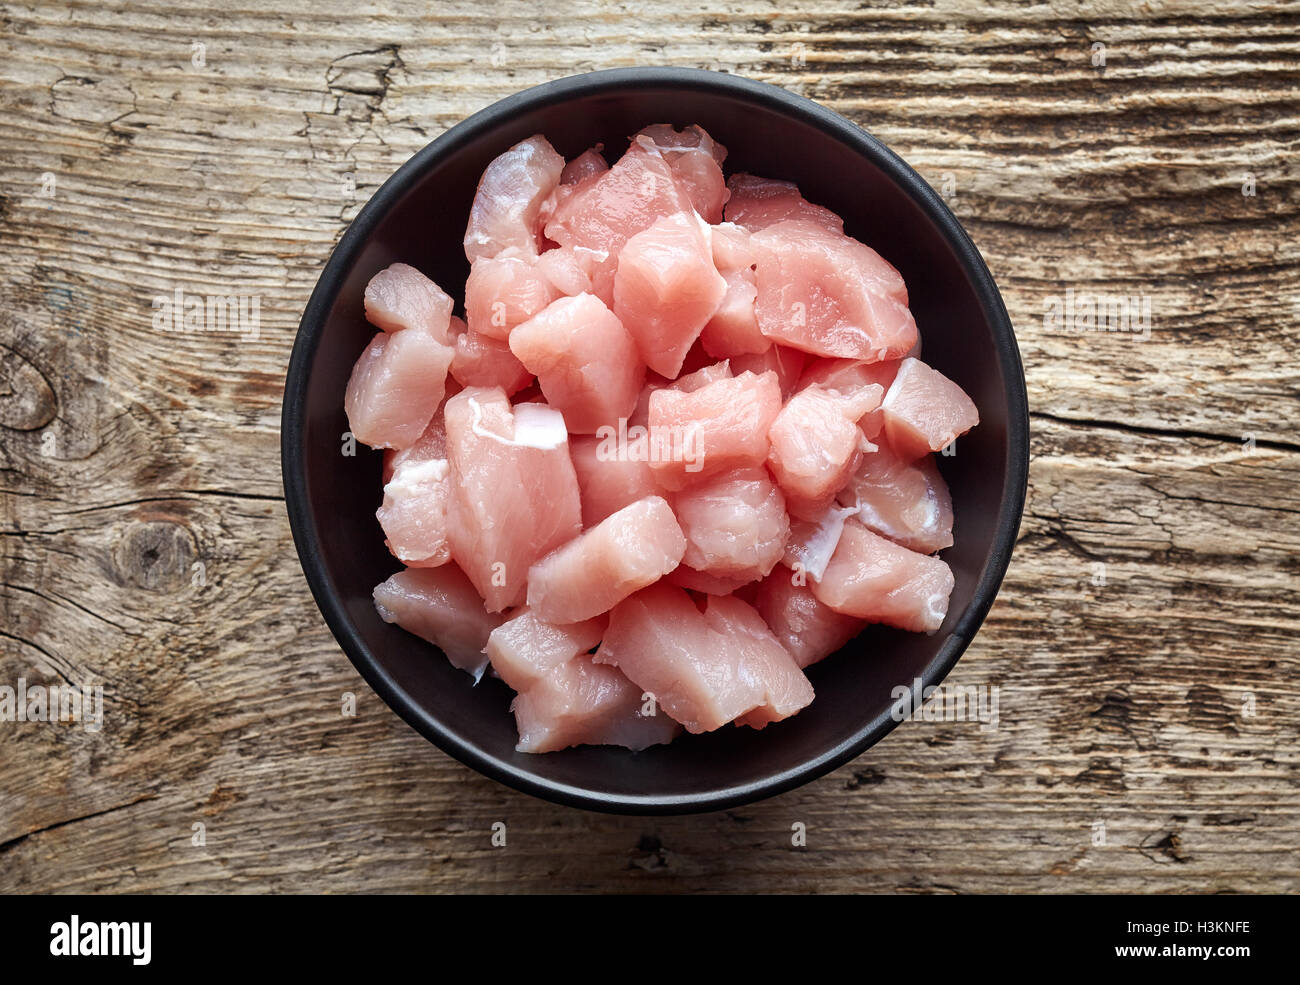 Raw cut meat chunks in black bowl on wooden table, top view Stock Photo